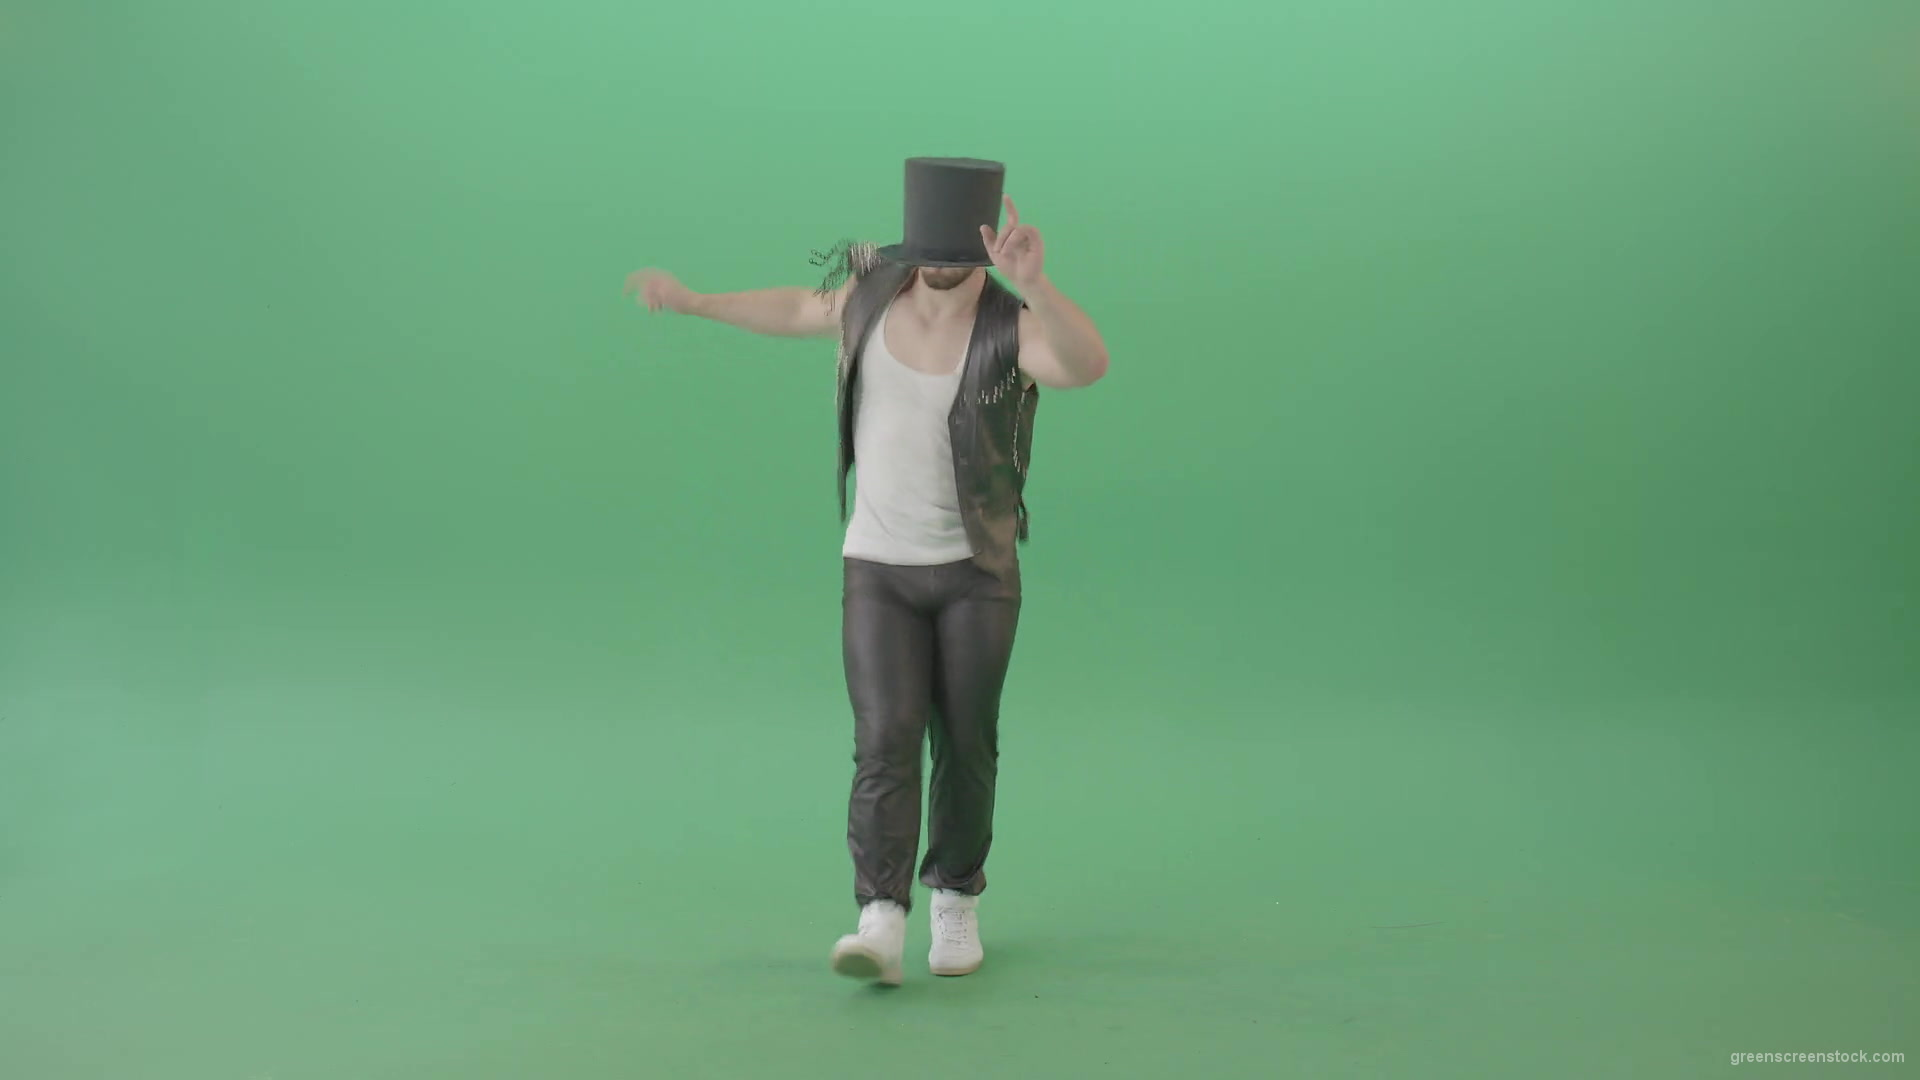 Man-in-black-Busines-Cylinder-Hat-dancing-and-jumping-in-Shuffle-dance-isolated-on-Green-Screen-4K-Video-Footage-1920_002 Green Screen Stock